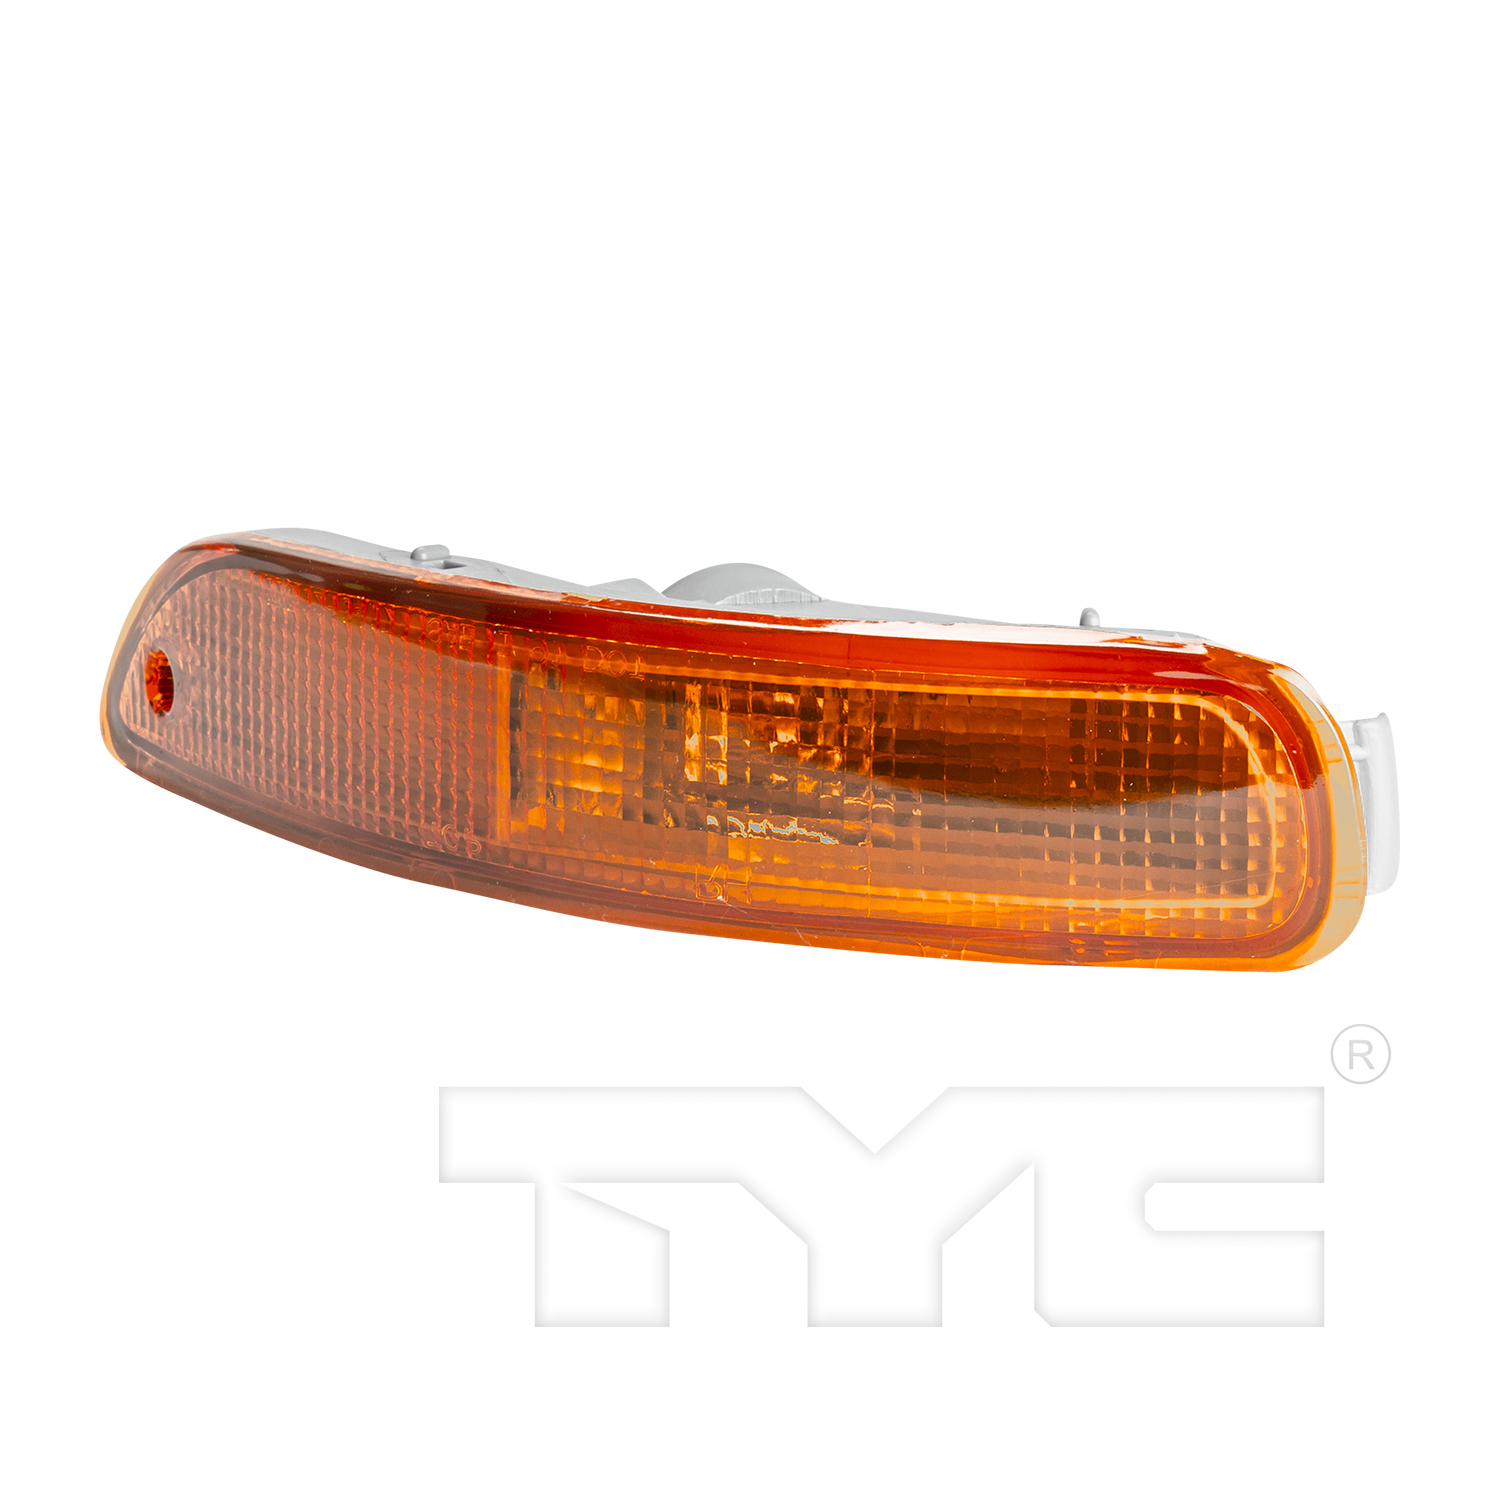 Aftermarket LAMPS for TOYOTA - COROLLA, COROLLA,93-97,LT Front signal lamp